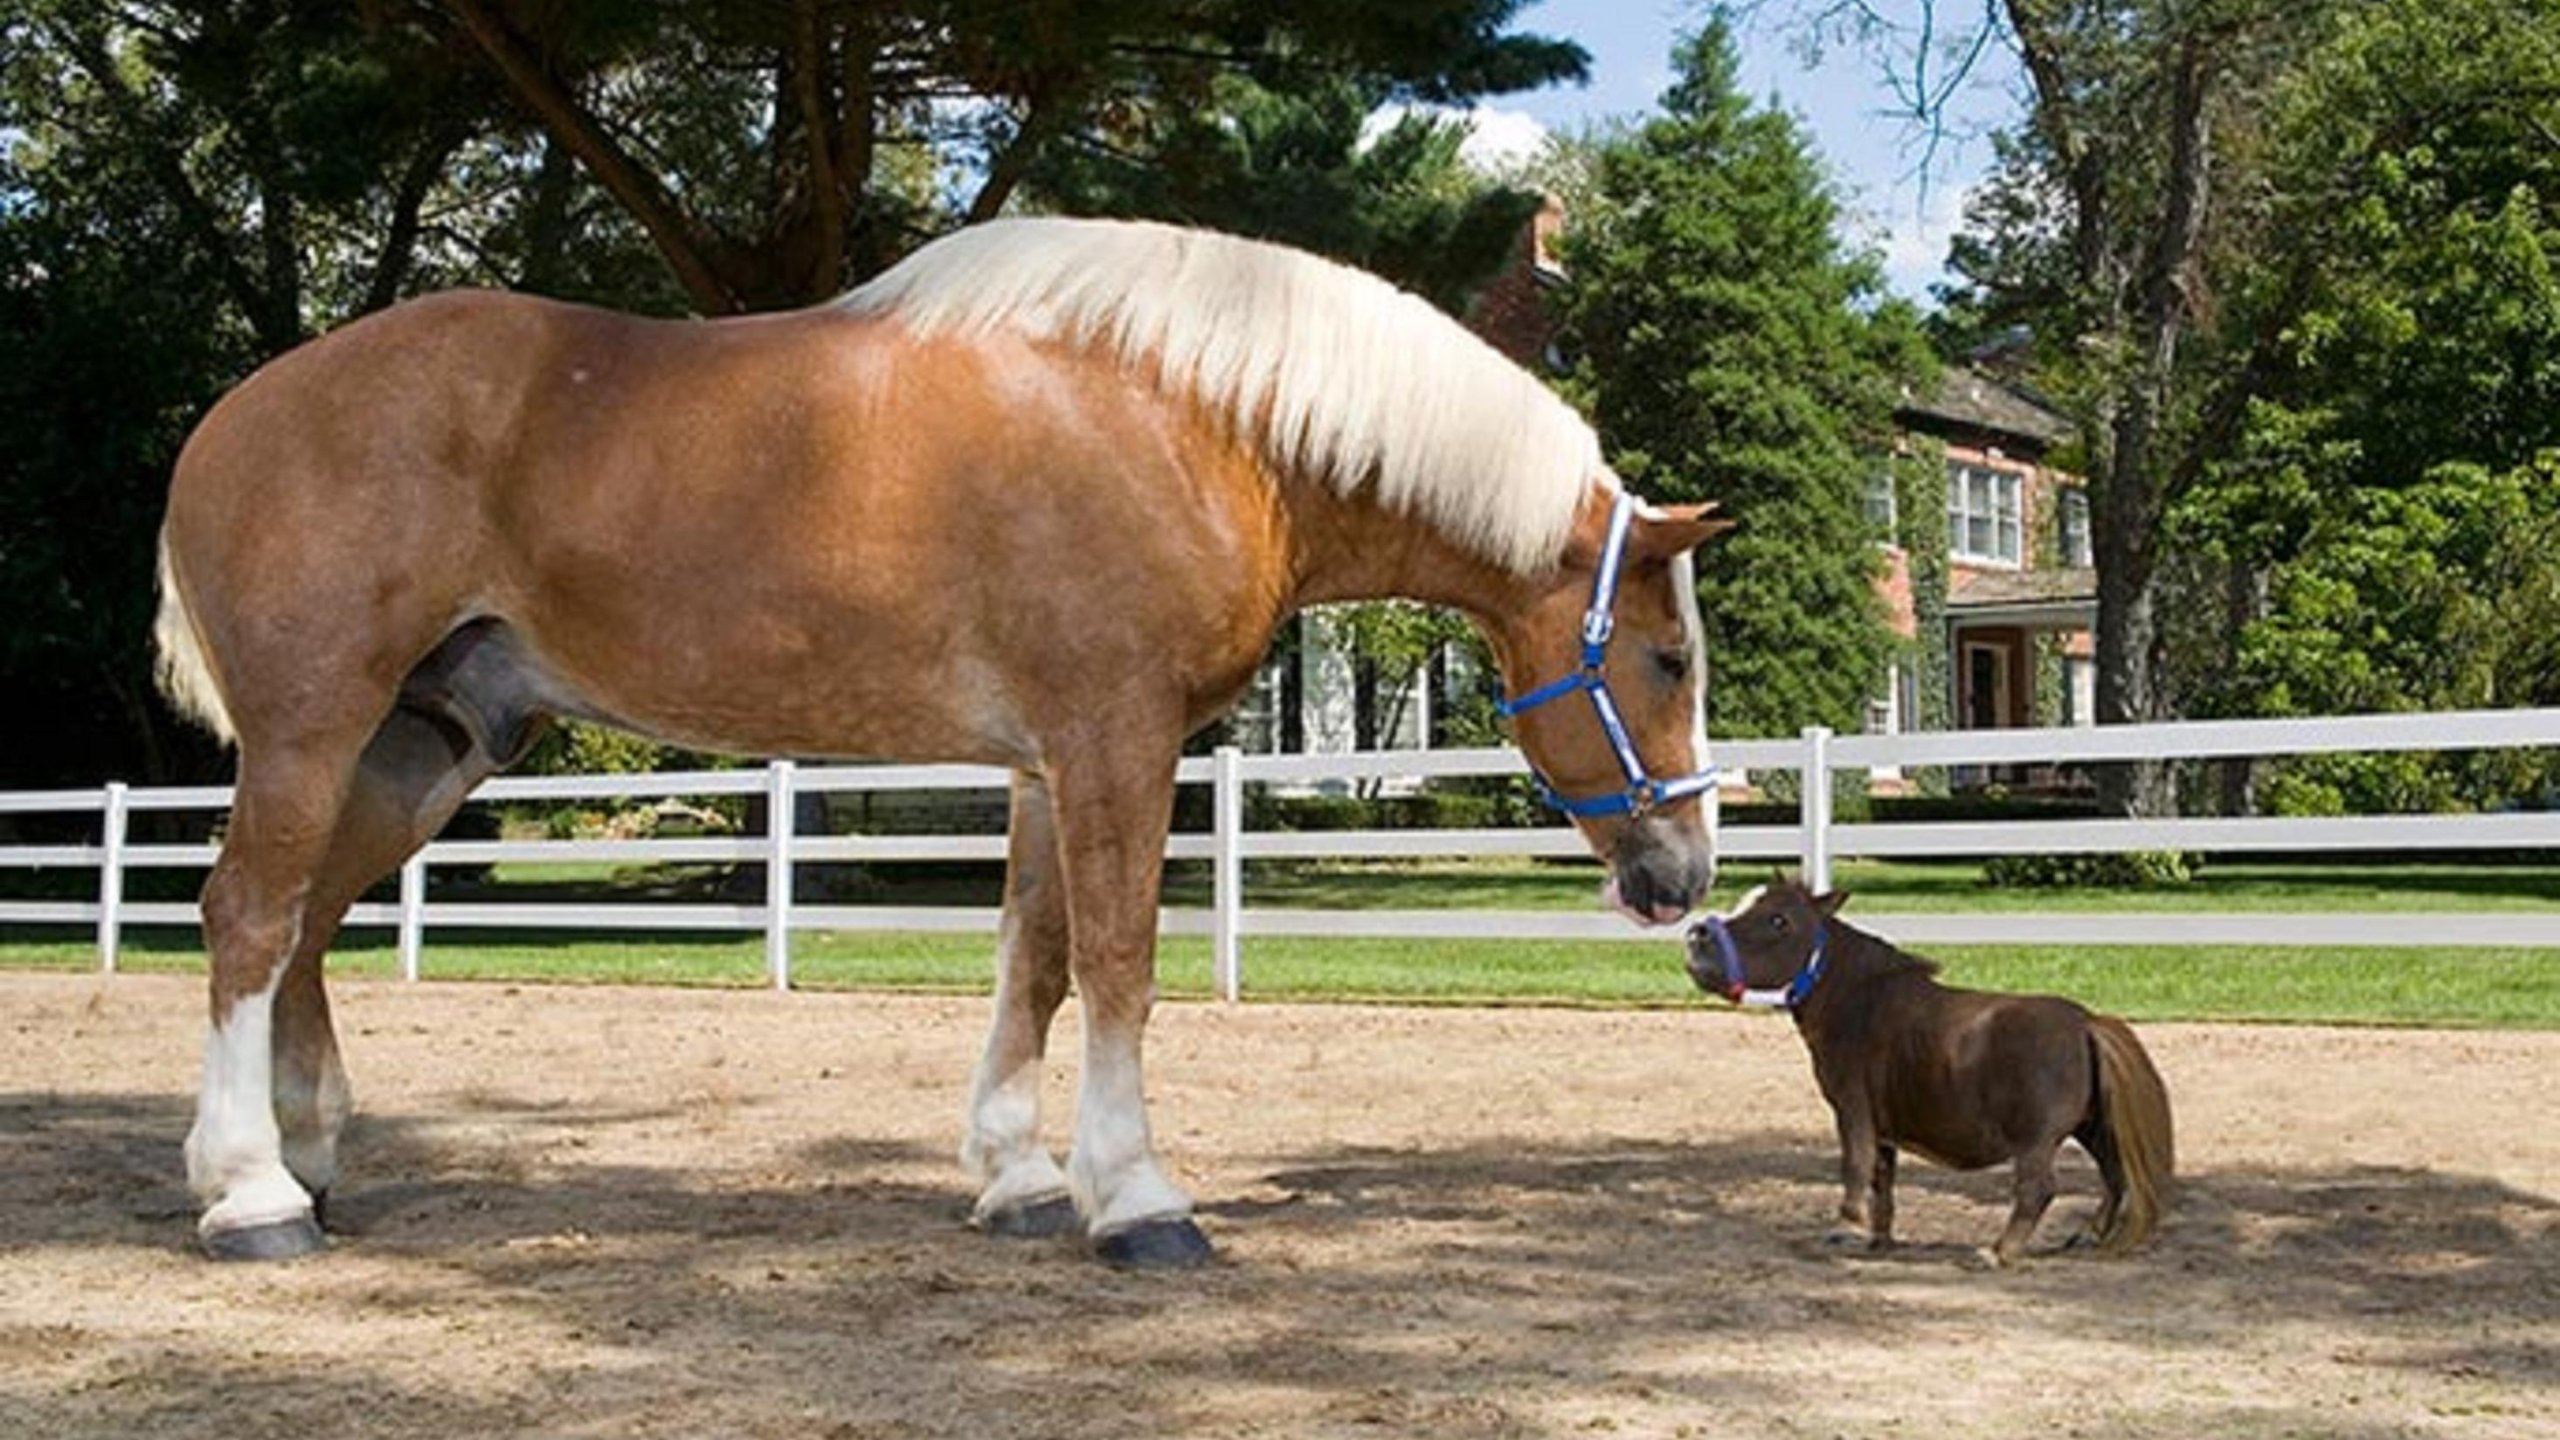 The Tallest and Smallest Horses In The World